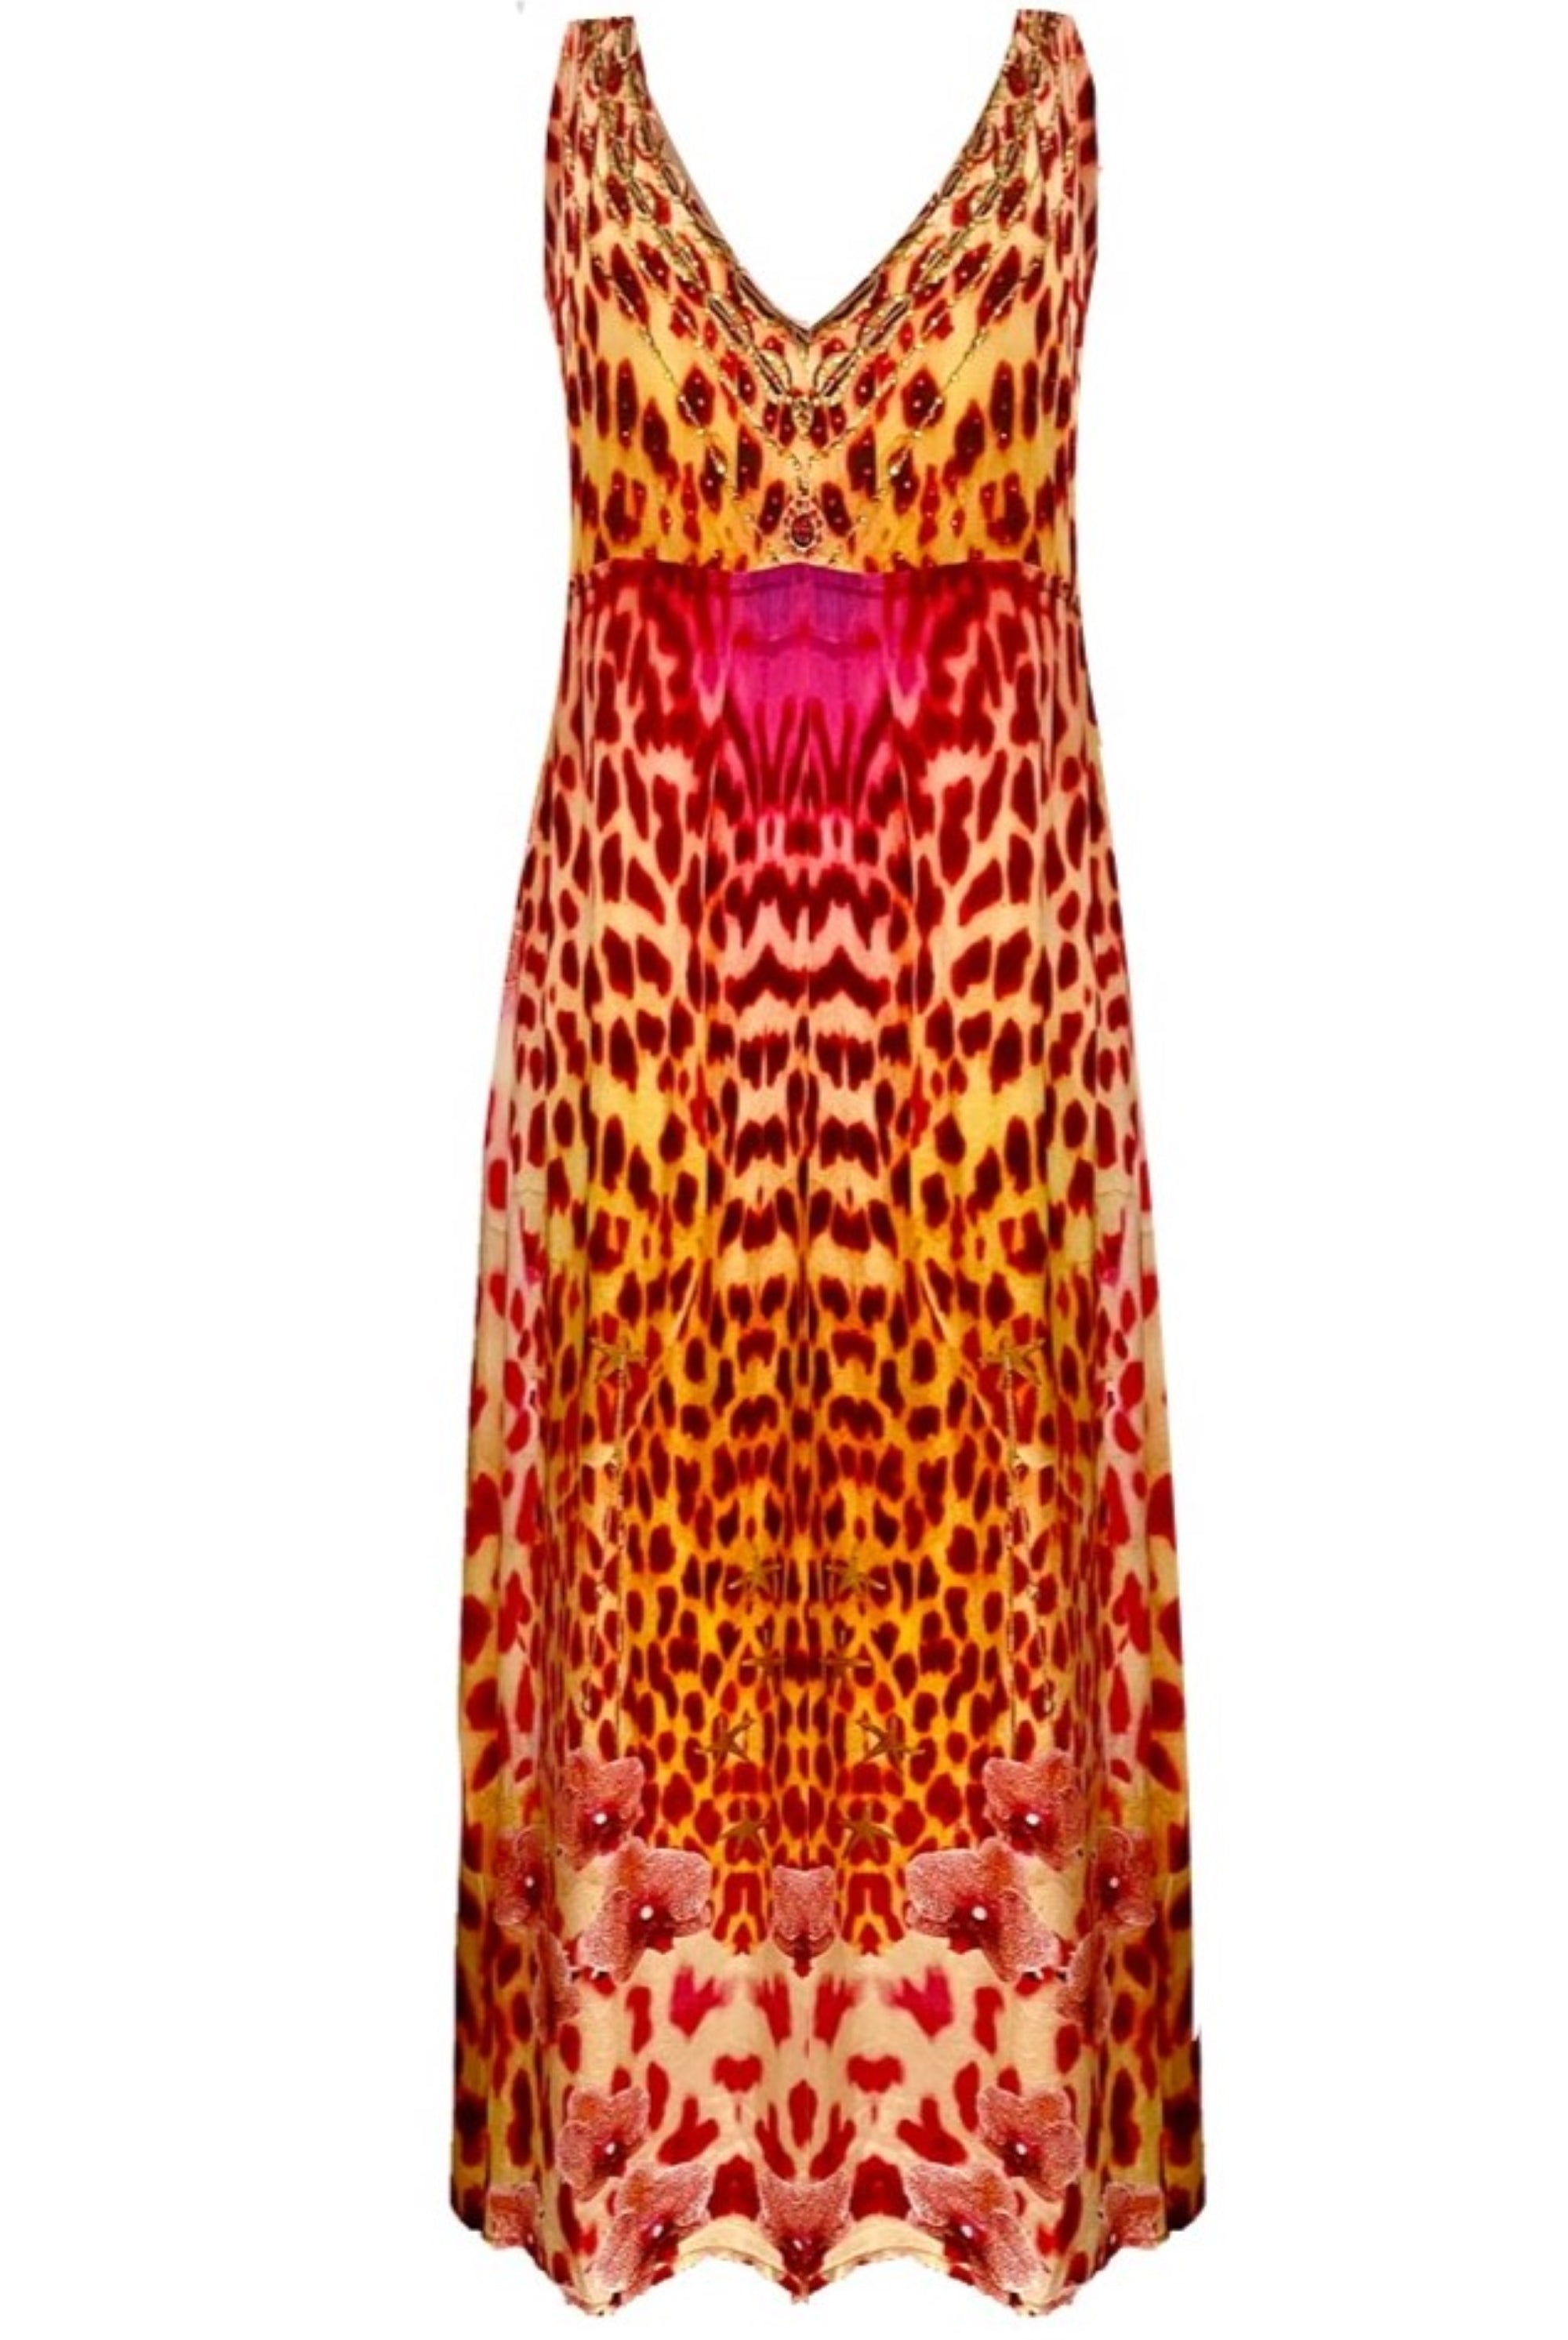 Animal print silk printed maxi dress to wear on holiday by Lindsey Brown resort wear 